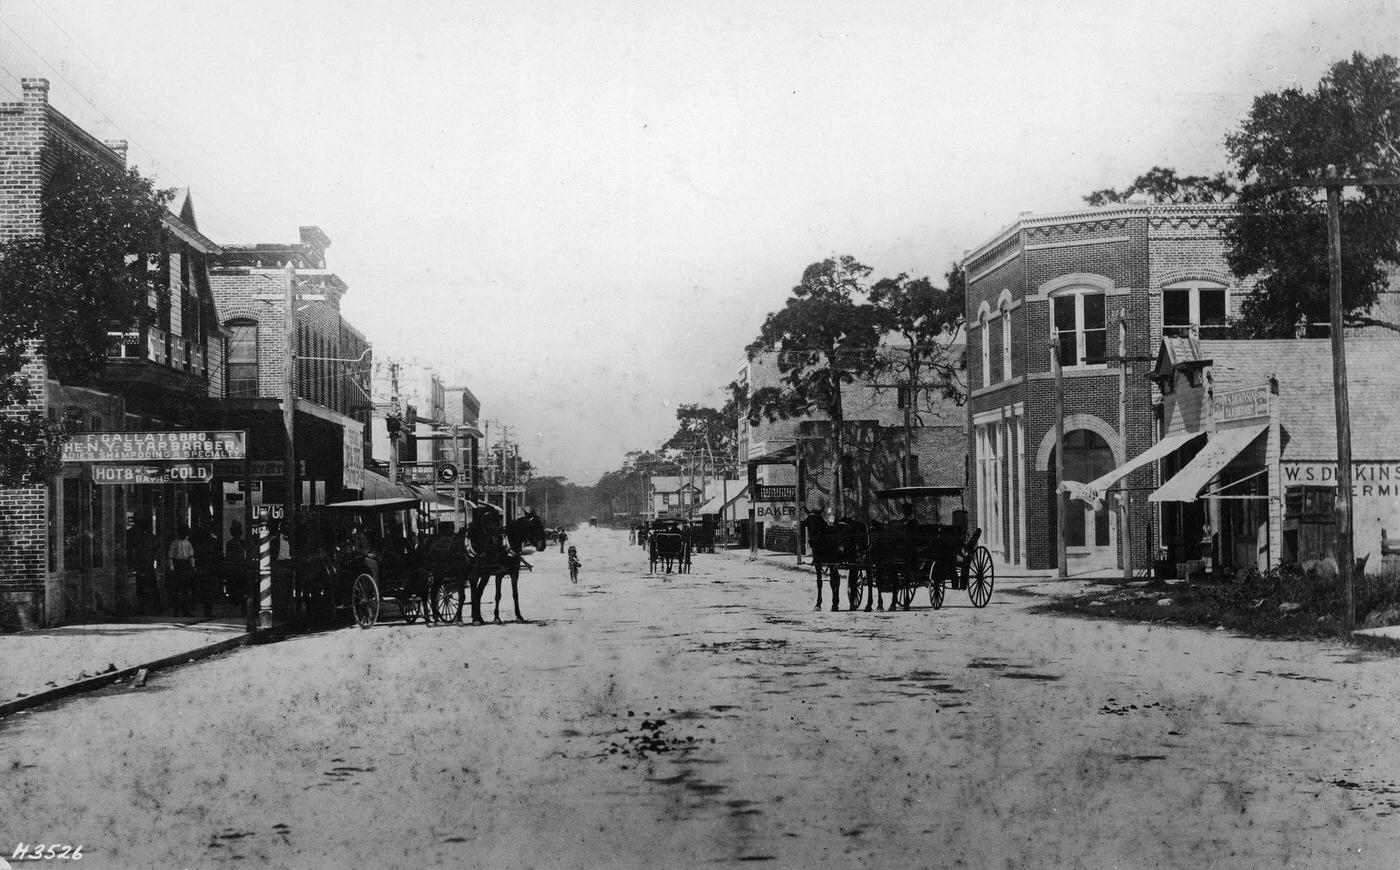 Horses, carriages, and pedestrians are seen as one looks West along the shops which line unpaved Flagler Street, Miami, Florida, circa 1900.